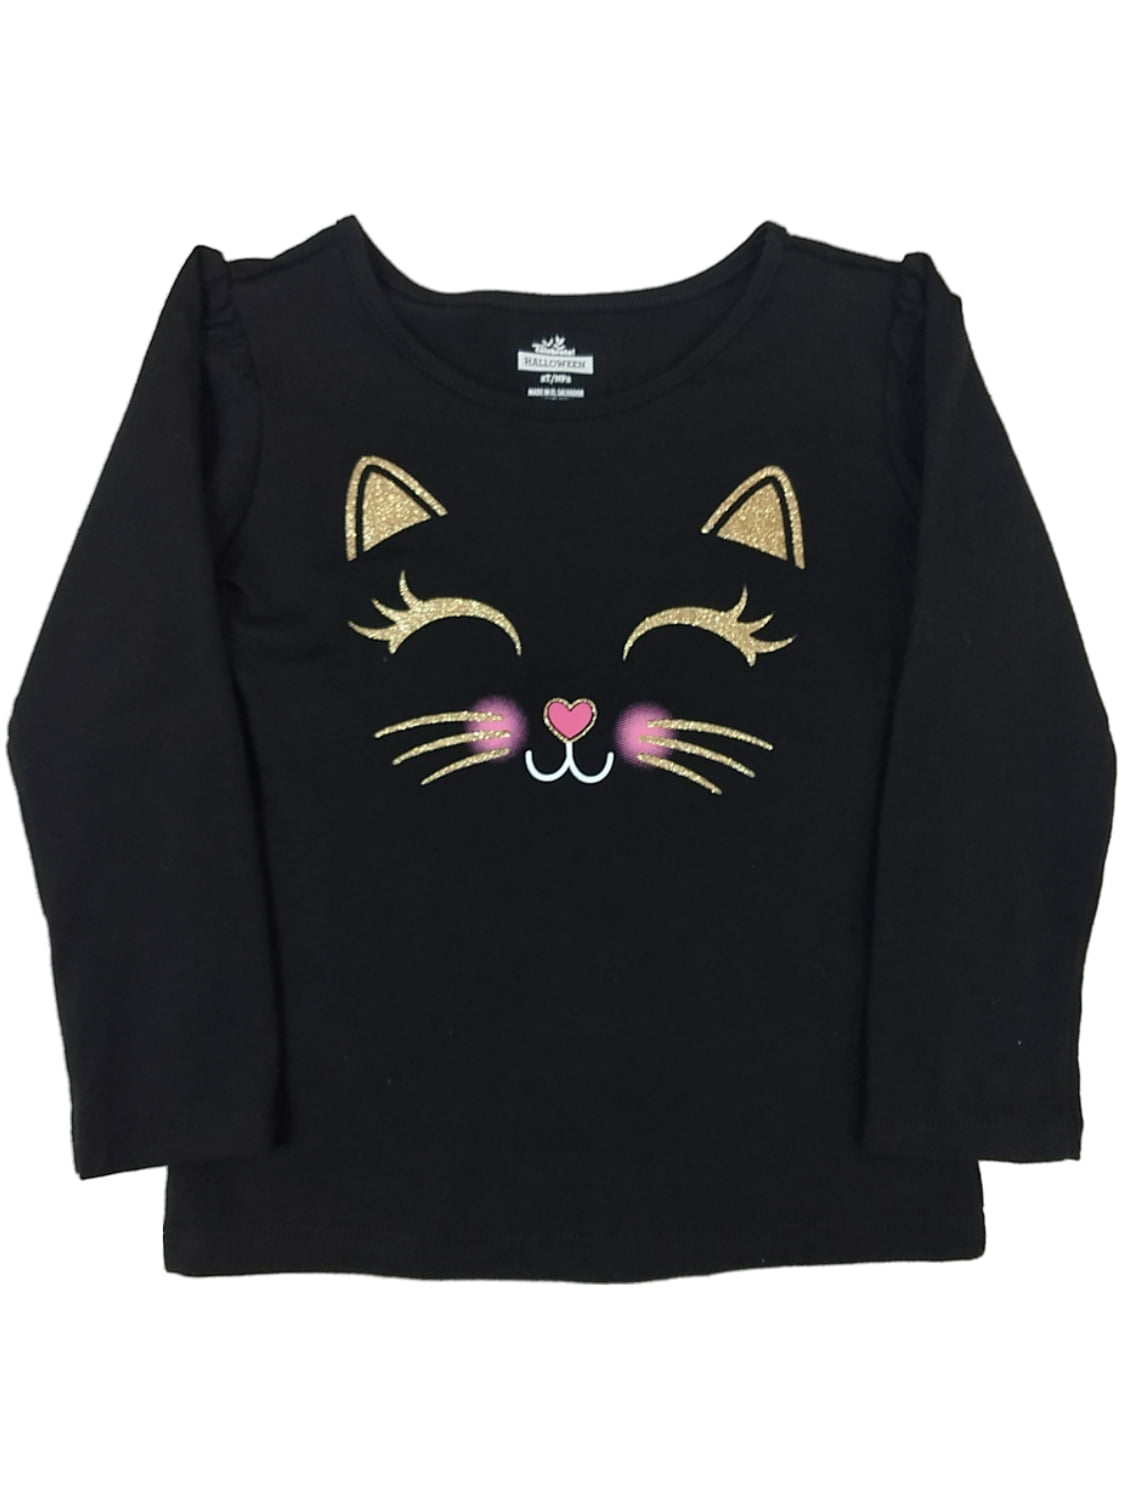 Kids Long Sleeve Character Top Girls Printed Cat Shirts Size 2-6 Years Pink,Red 